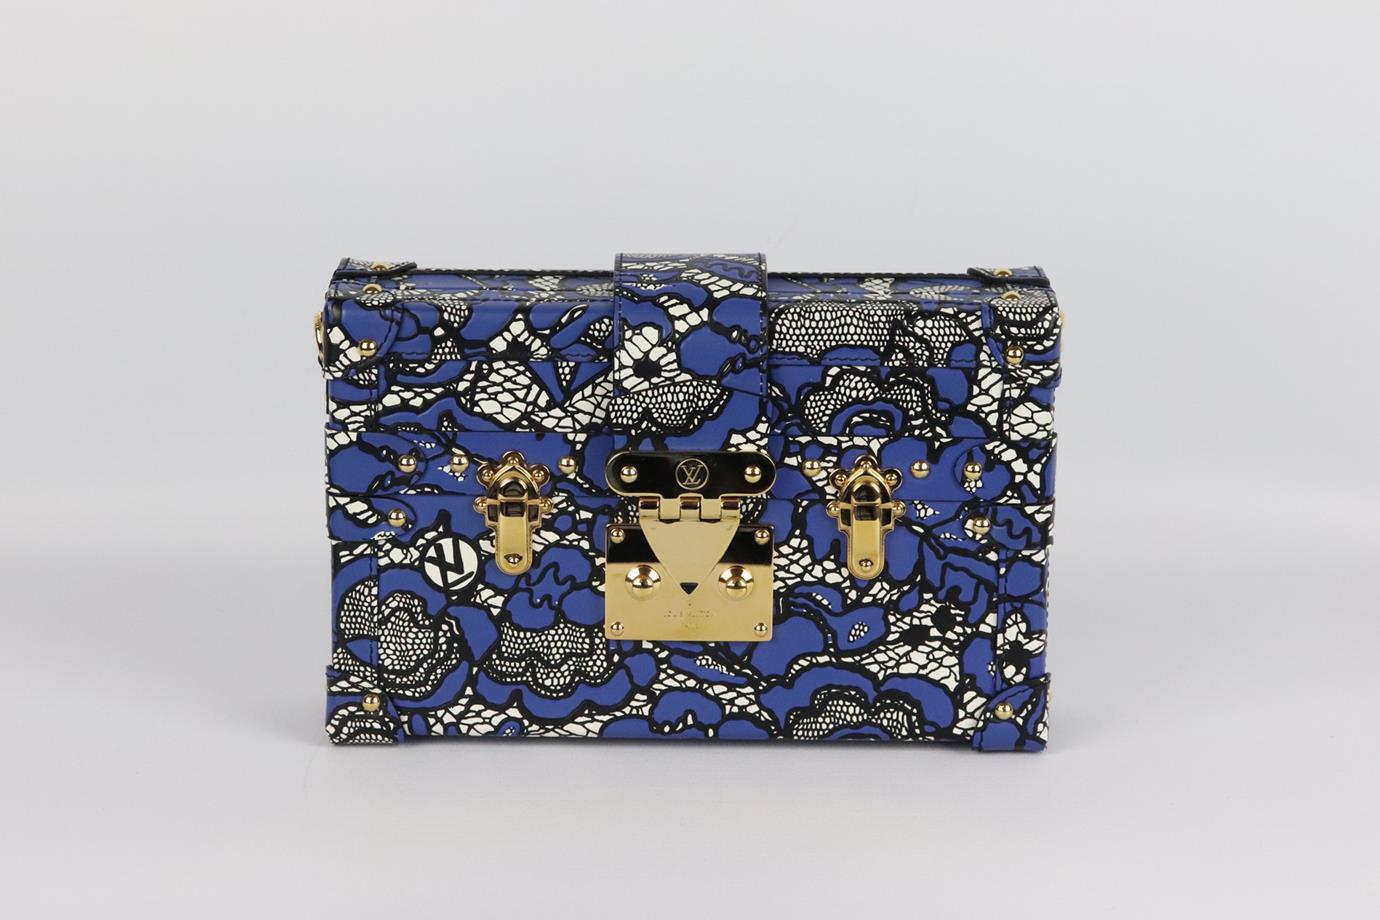 Louis Vuitton Petite Malle medium lace embossed leather clutch. Made from black, white and blue lace-embossed leather with gold-tone hardware, it has a large internal compartment and shoulder strap. Black, blue and white. Push lock fastening at